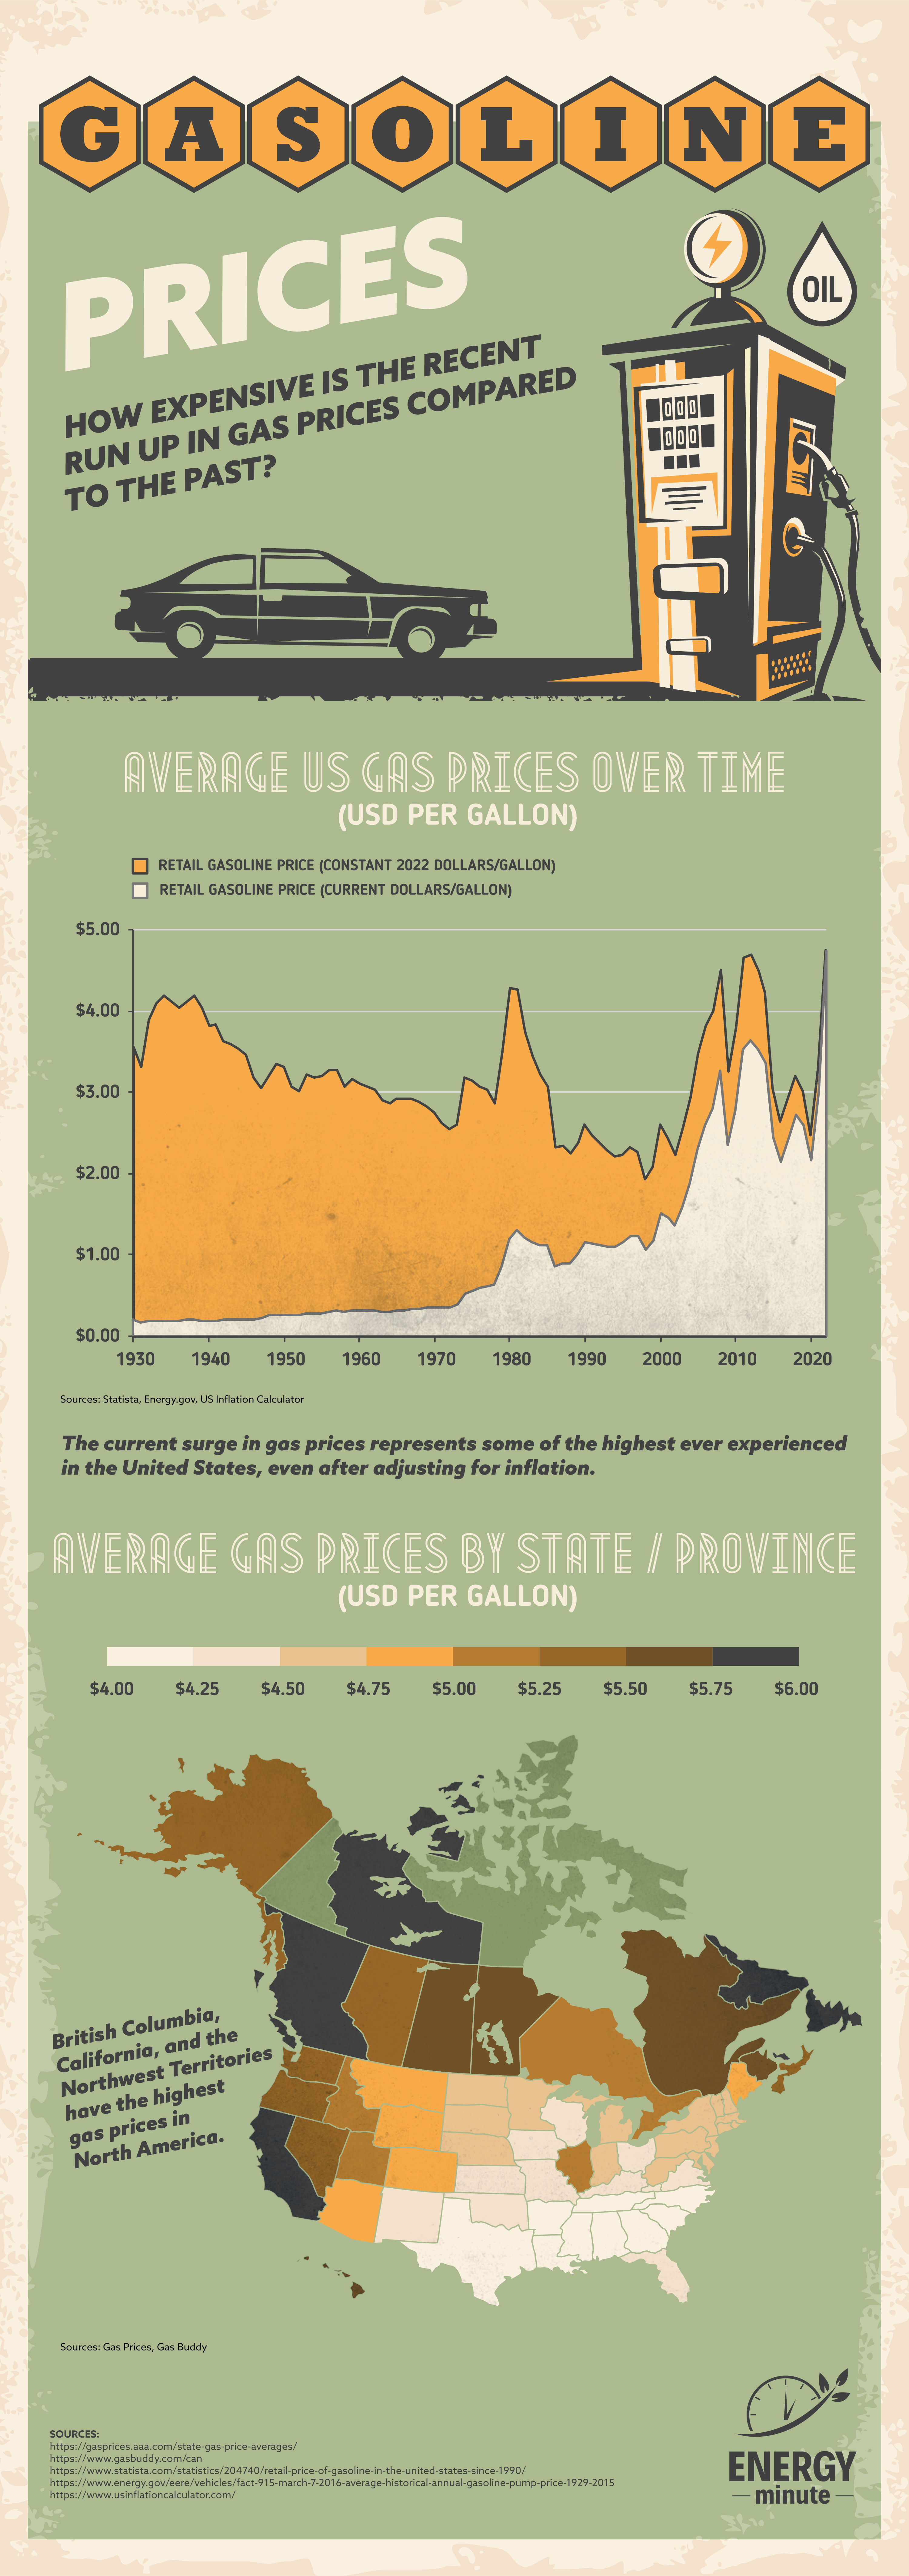 Linking Recent Gasoline Prices to the Past recorded prices